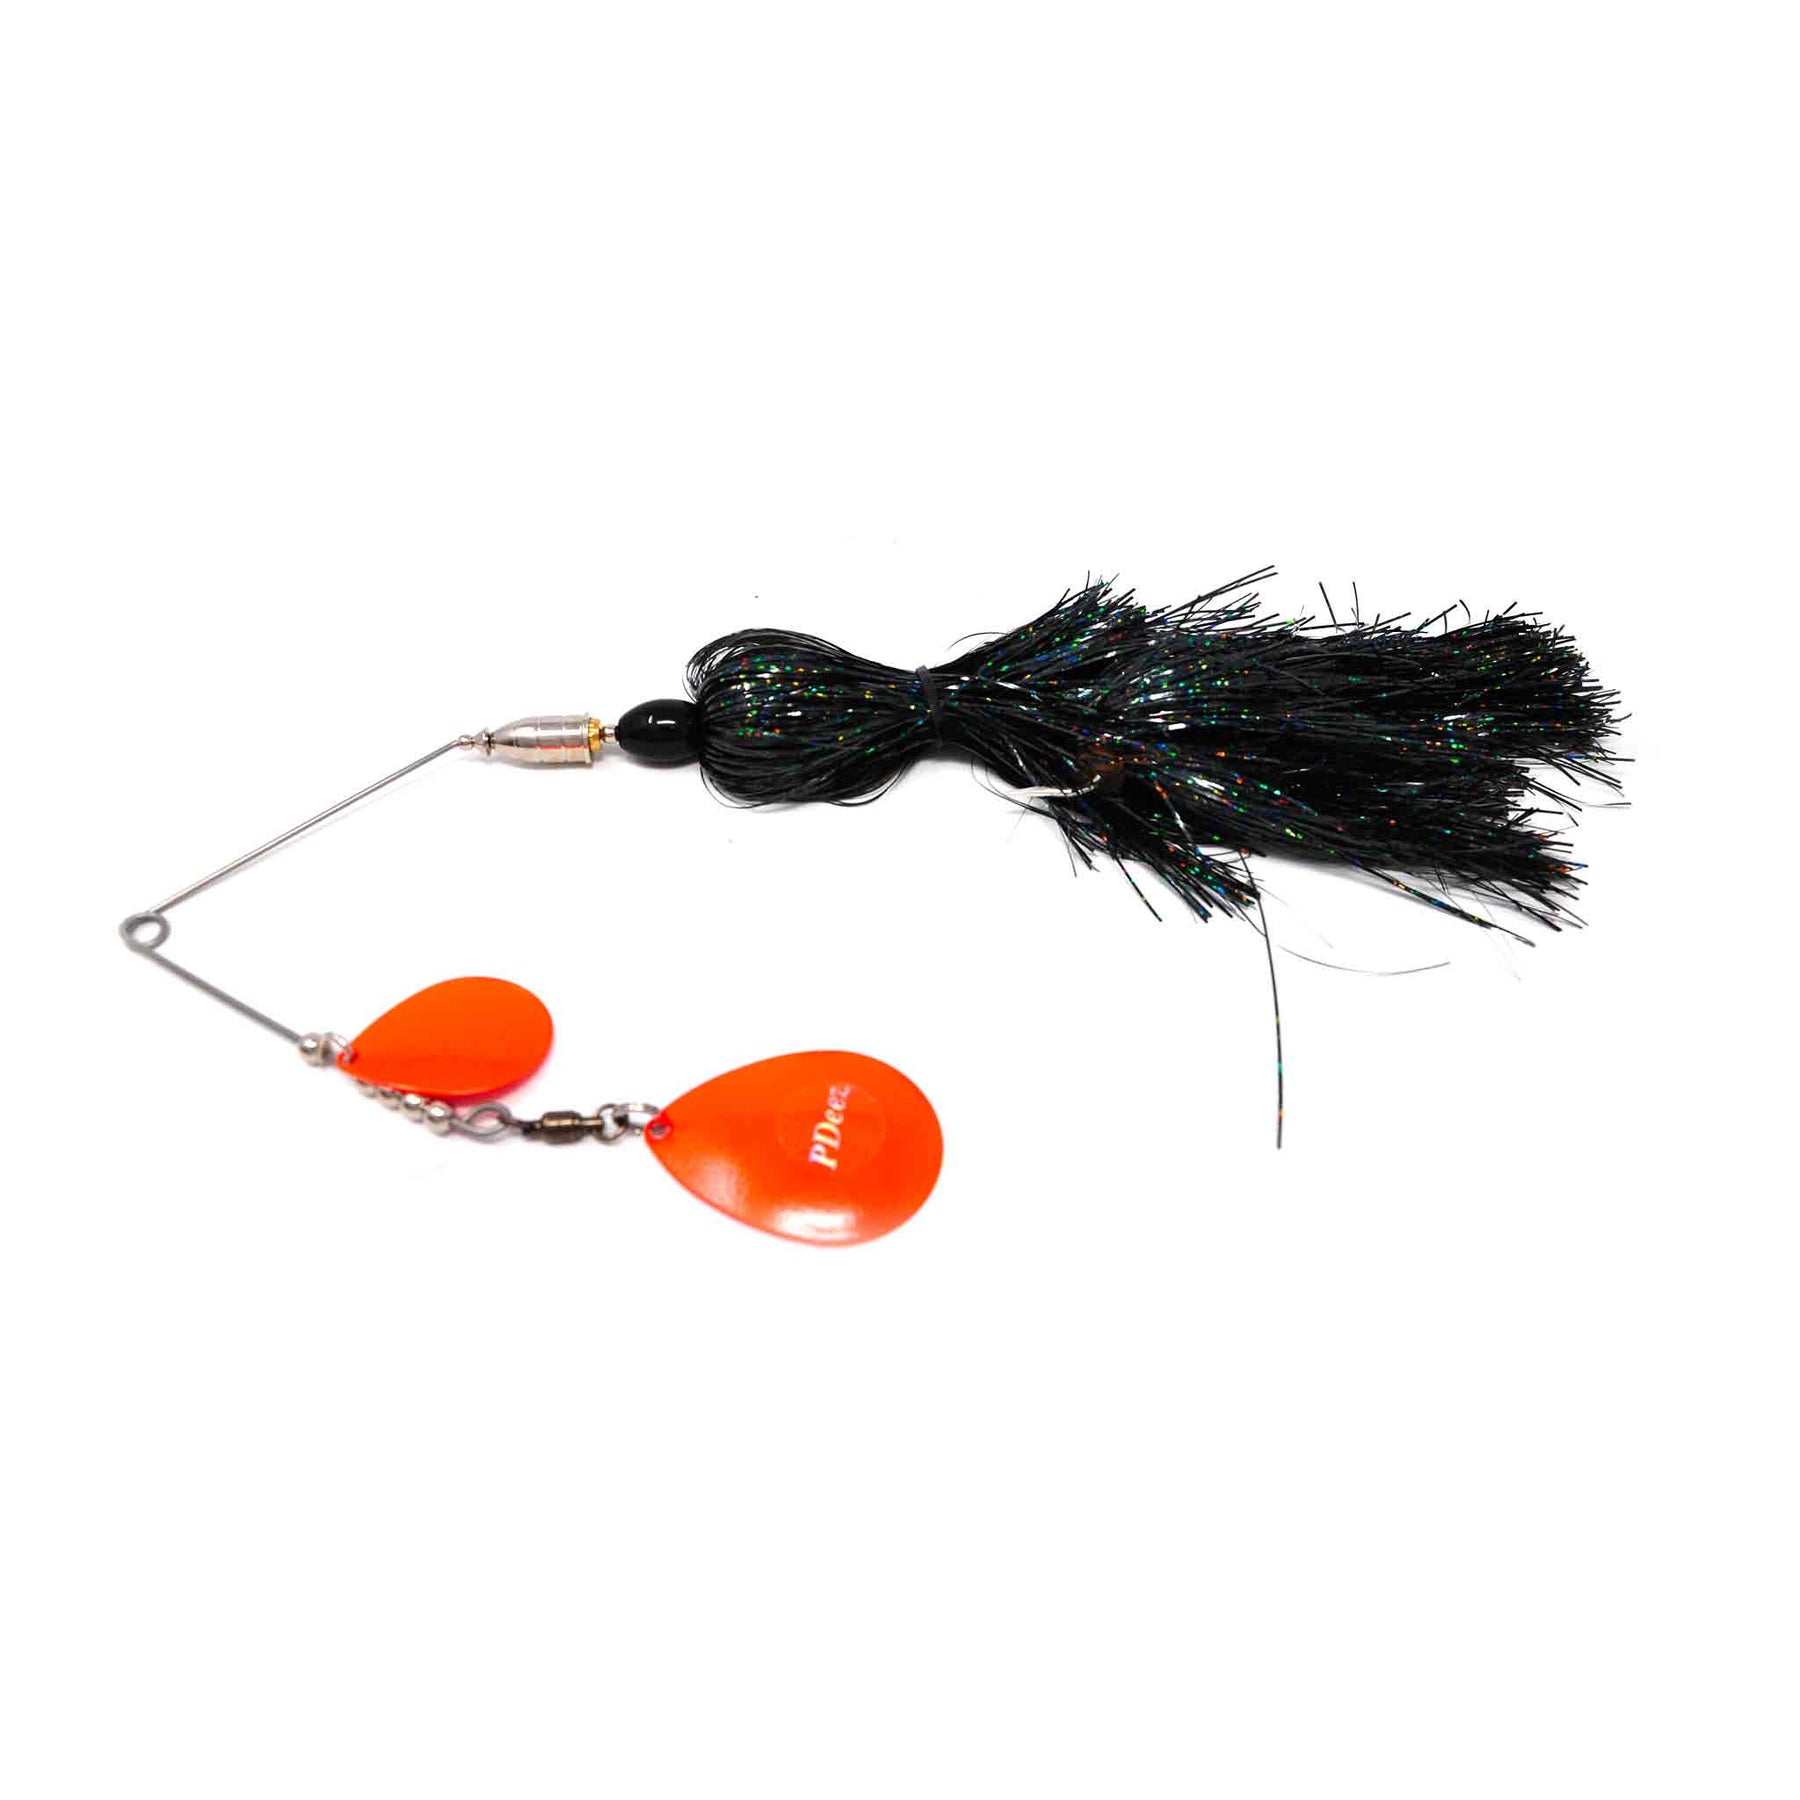 View of Spinnerbaits PDeez Bell Casting Spinnerbait Holographic Black / Orange available at EZOKO Pike and Musky Shop